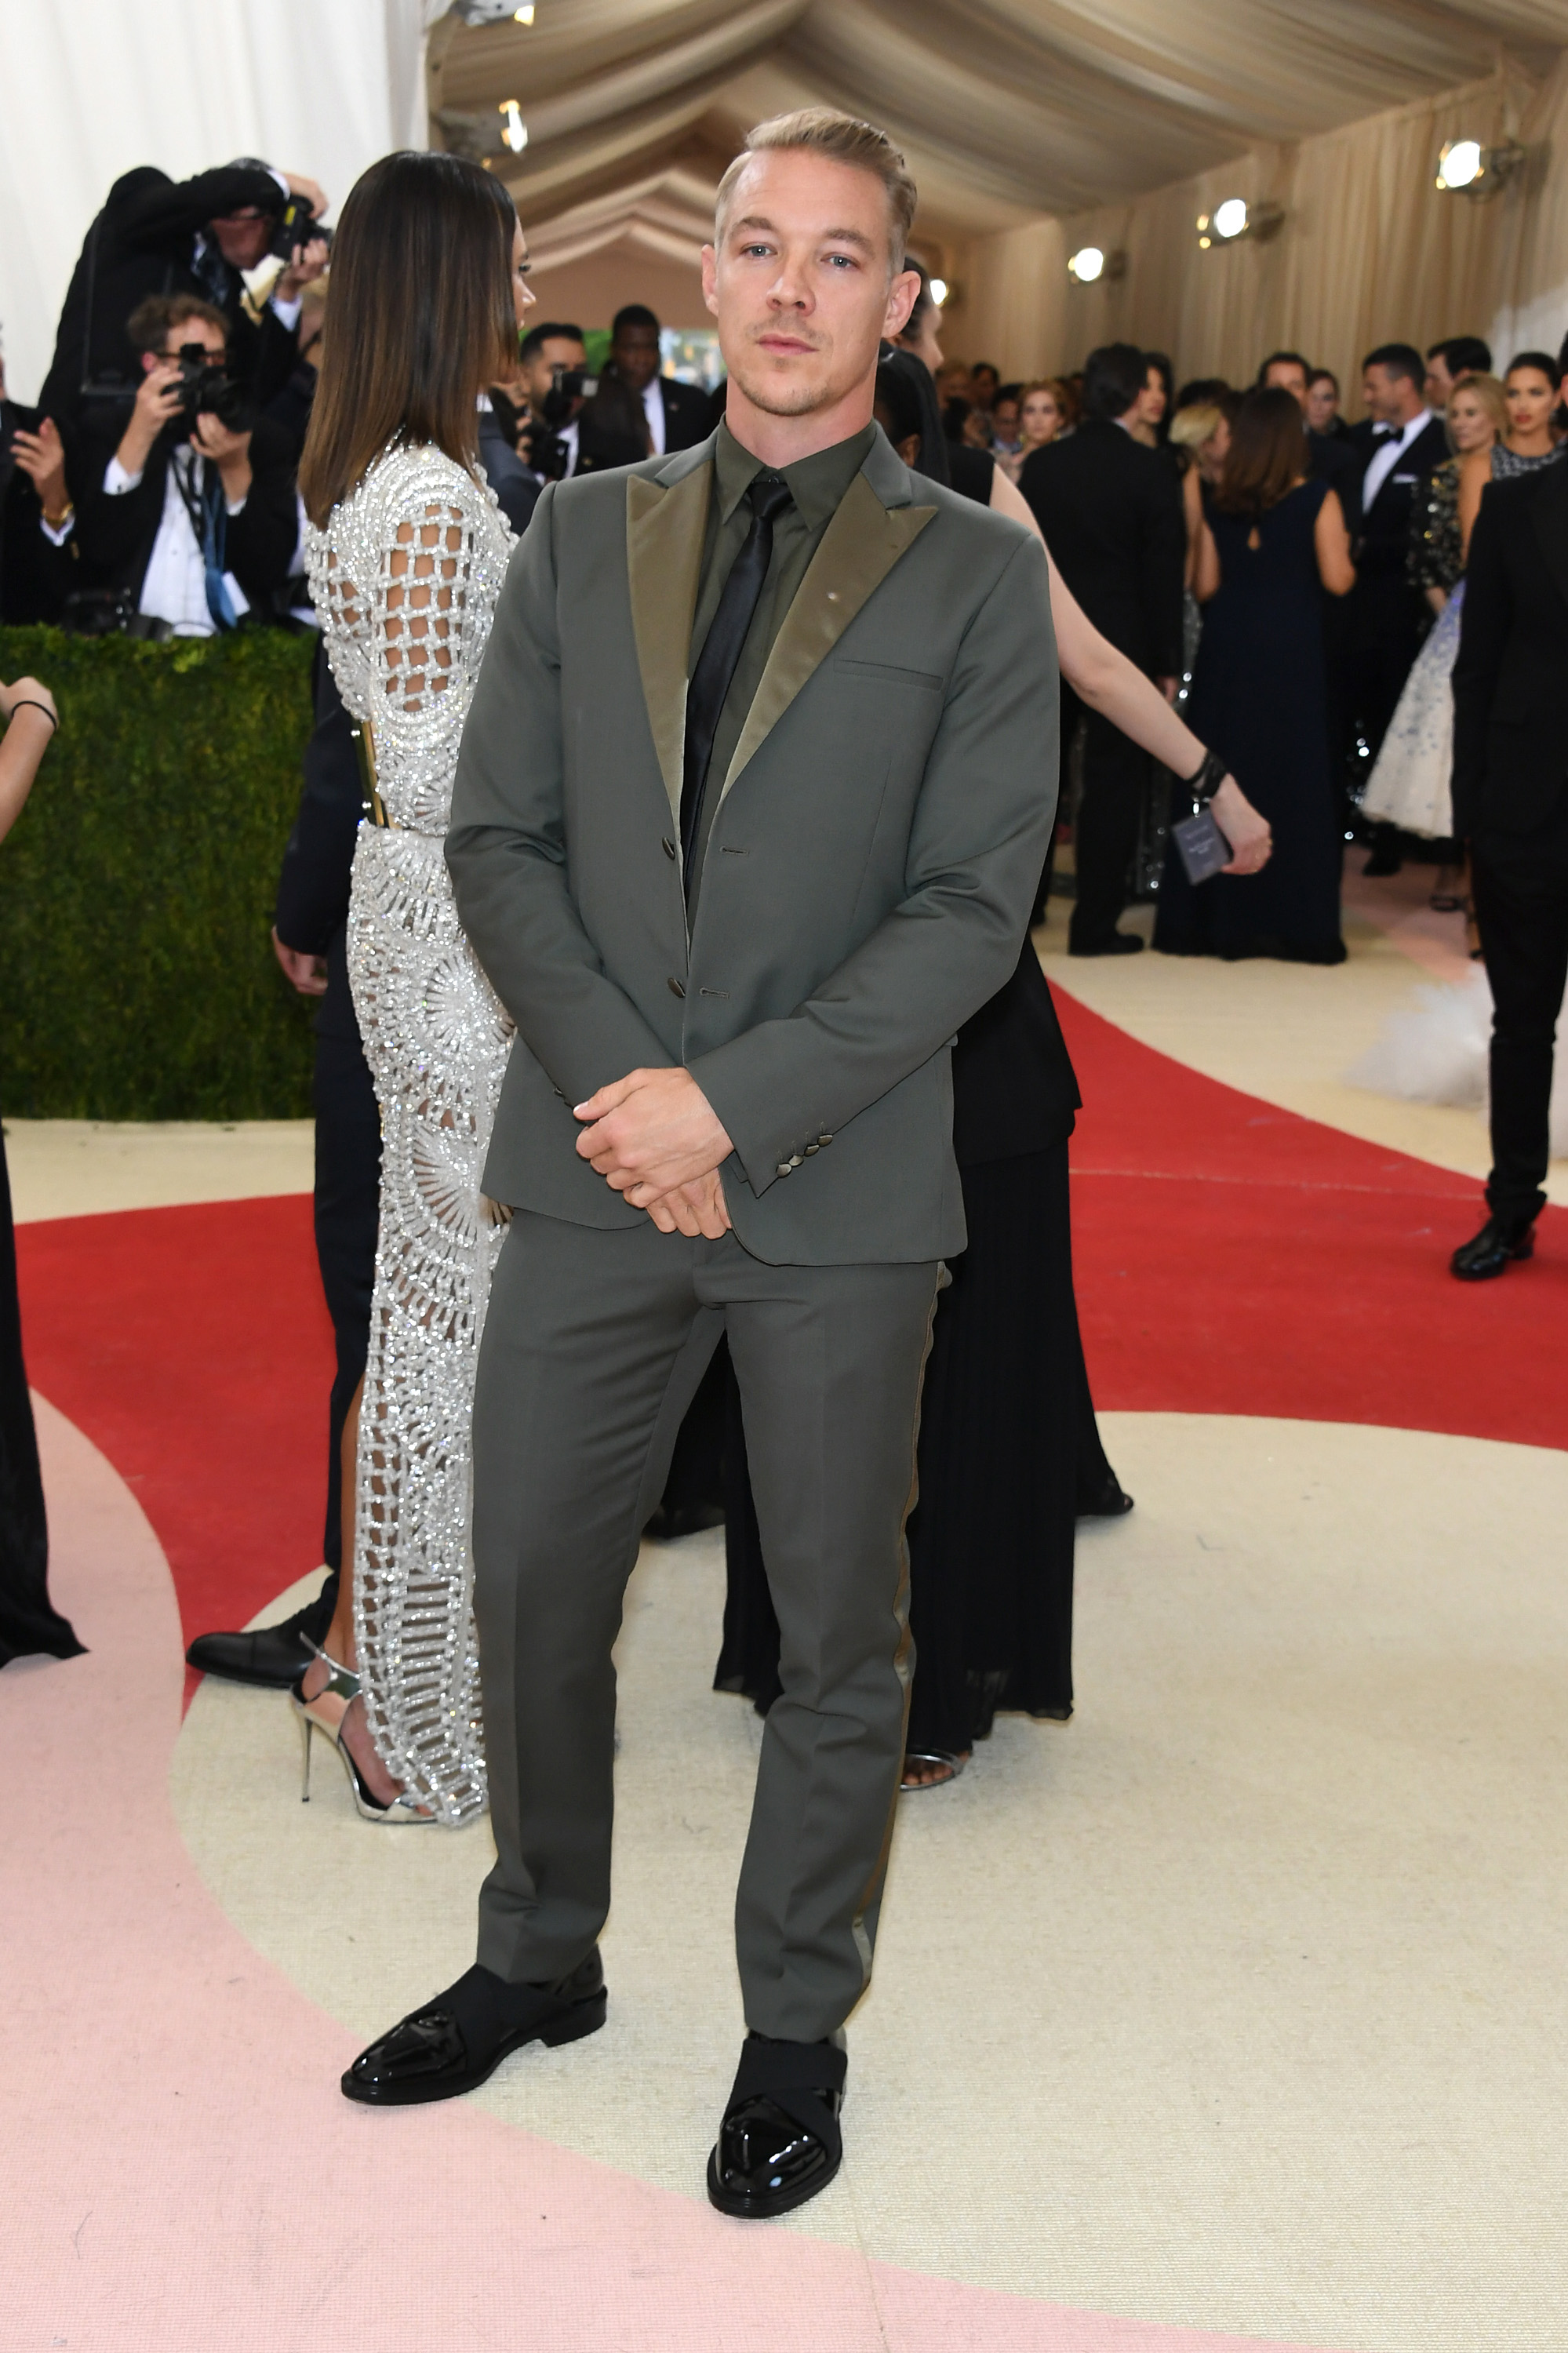 Diplo attends "Manus x Machina: Fashion In An Age Of Technology" Costume Institute Gala at Metropolitan Museum of Art on May 2, 2016 in New York City.